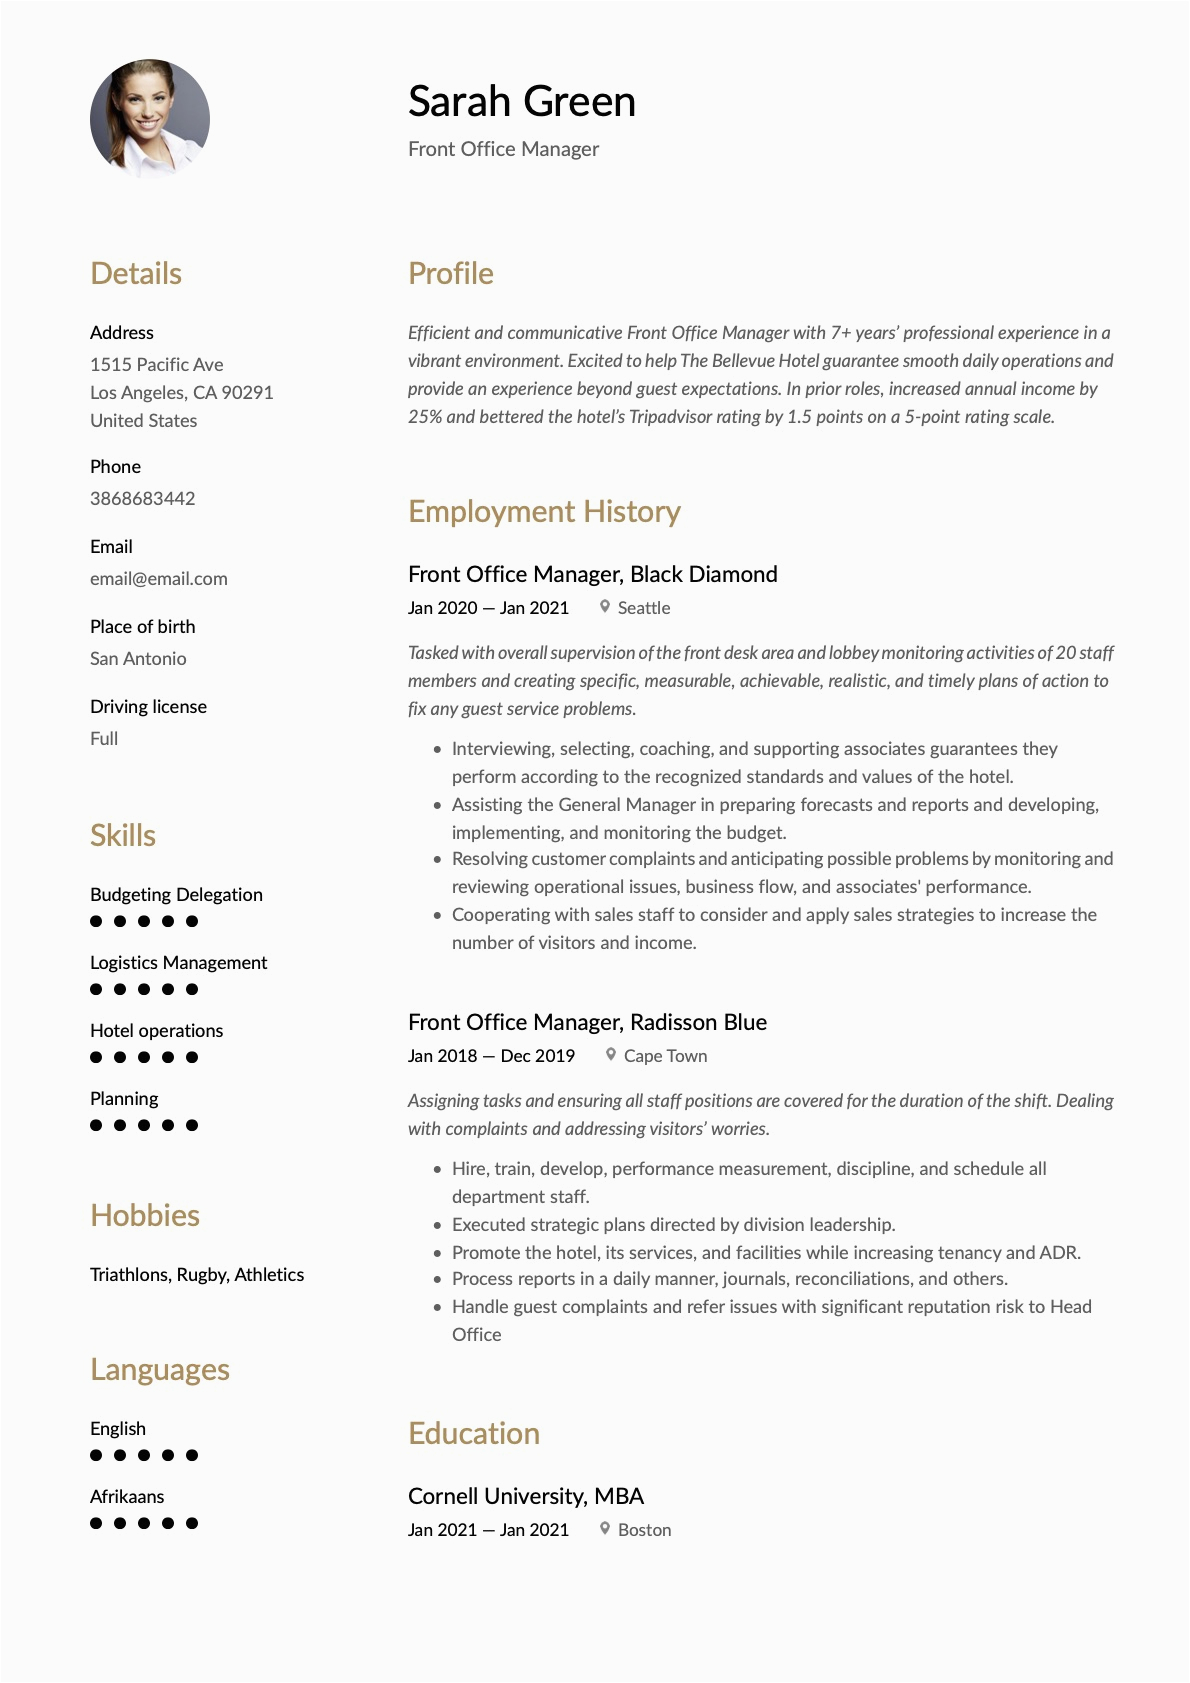 Front Office Manager Job Resume Sample Front Fice Manager Resume & Guide